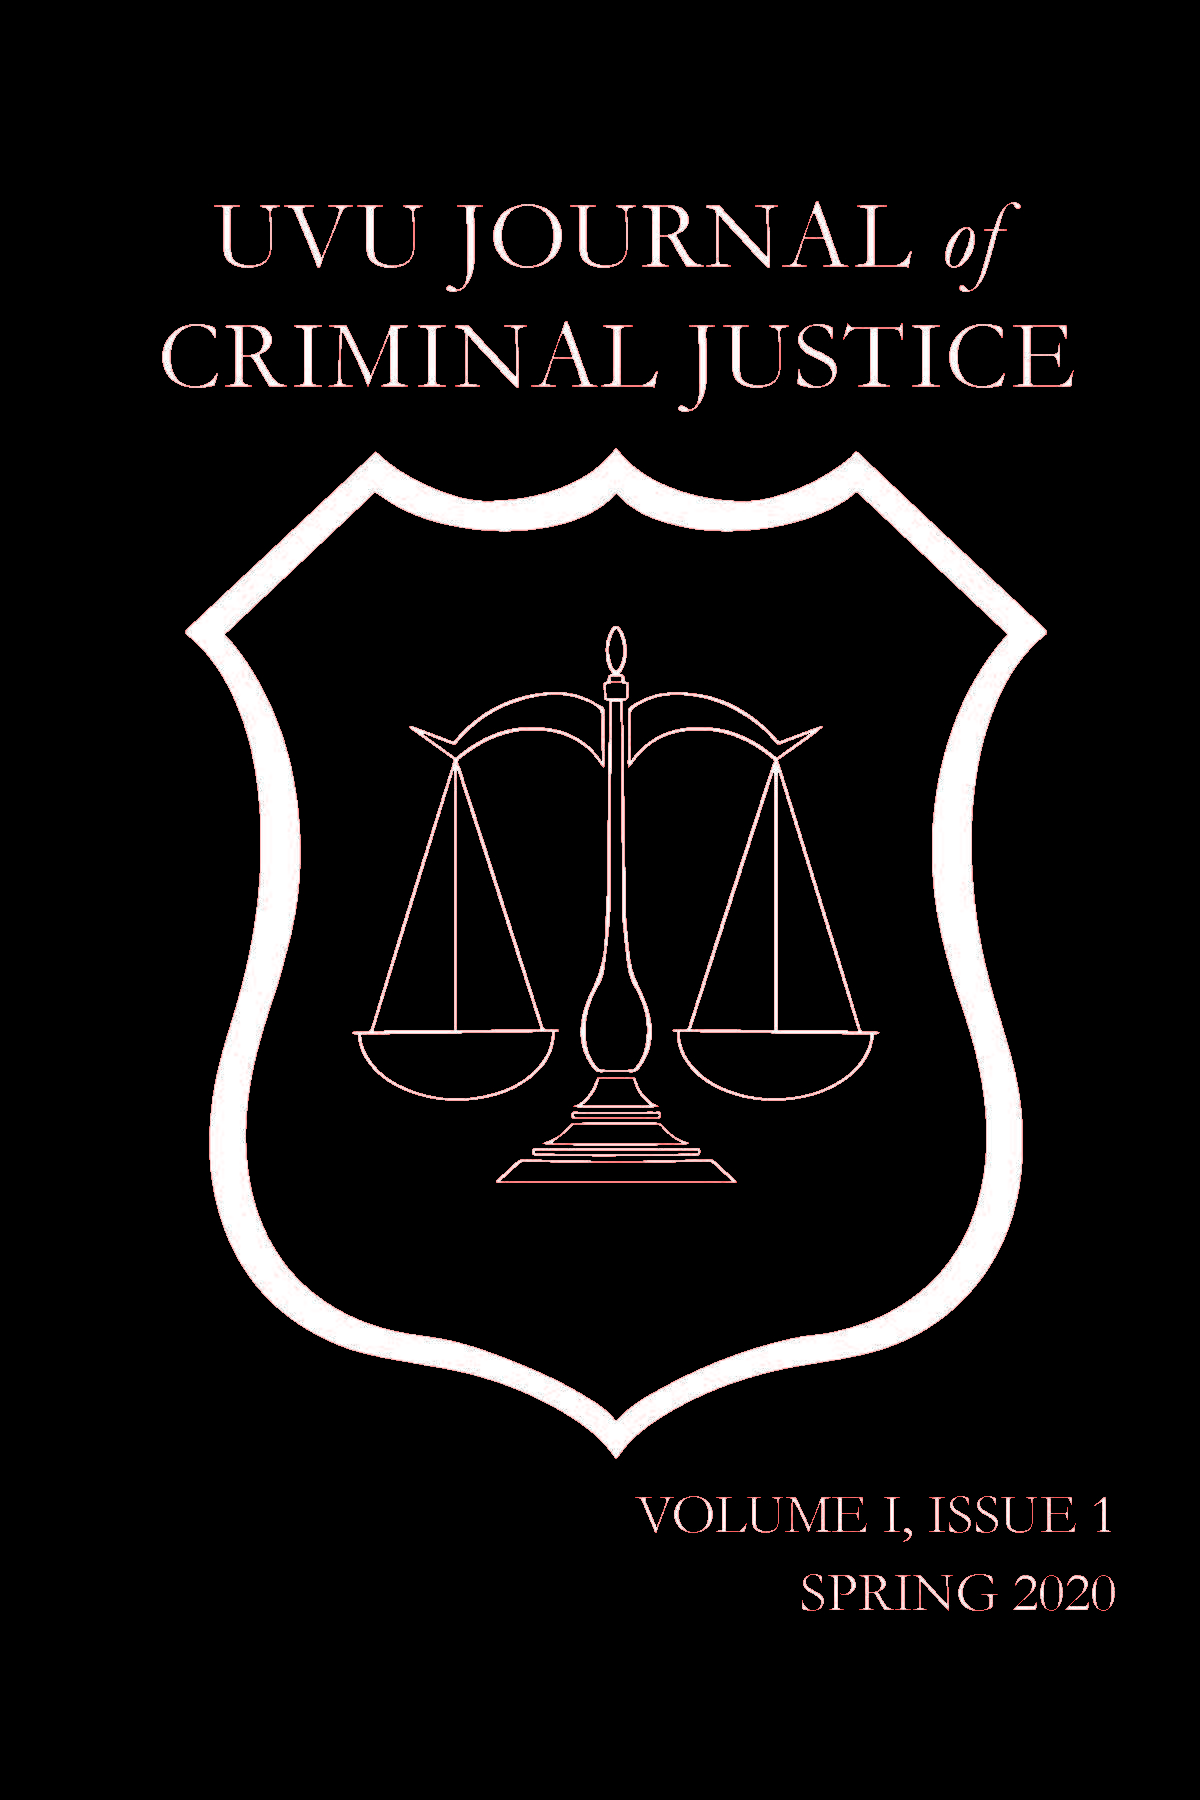 Cover of 2020 spring journal showing the scales of justice